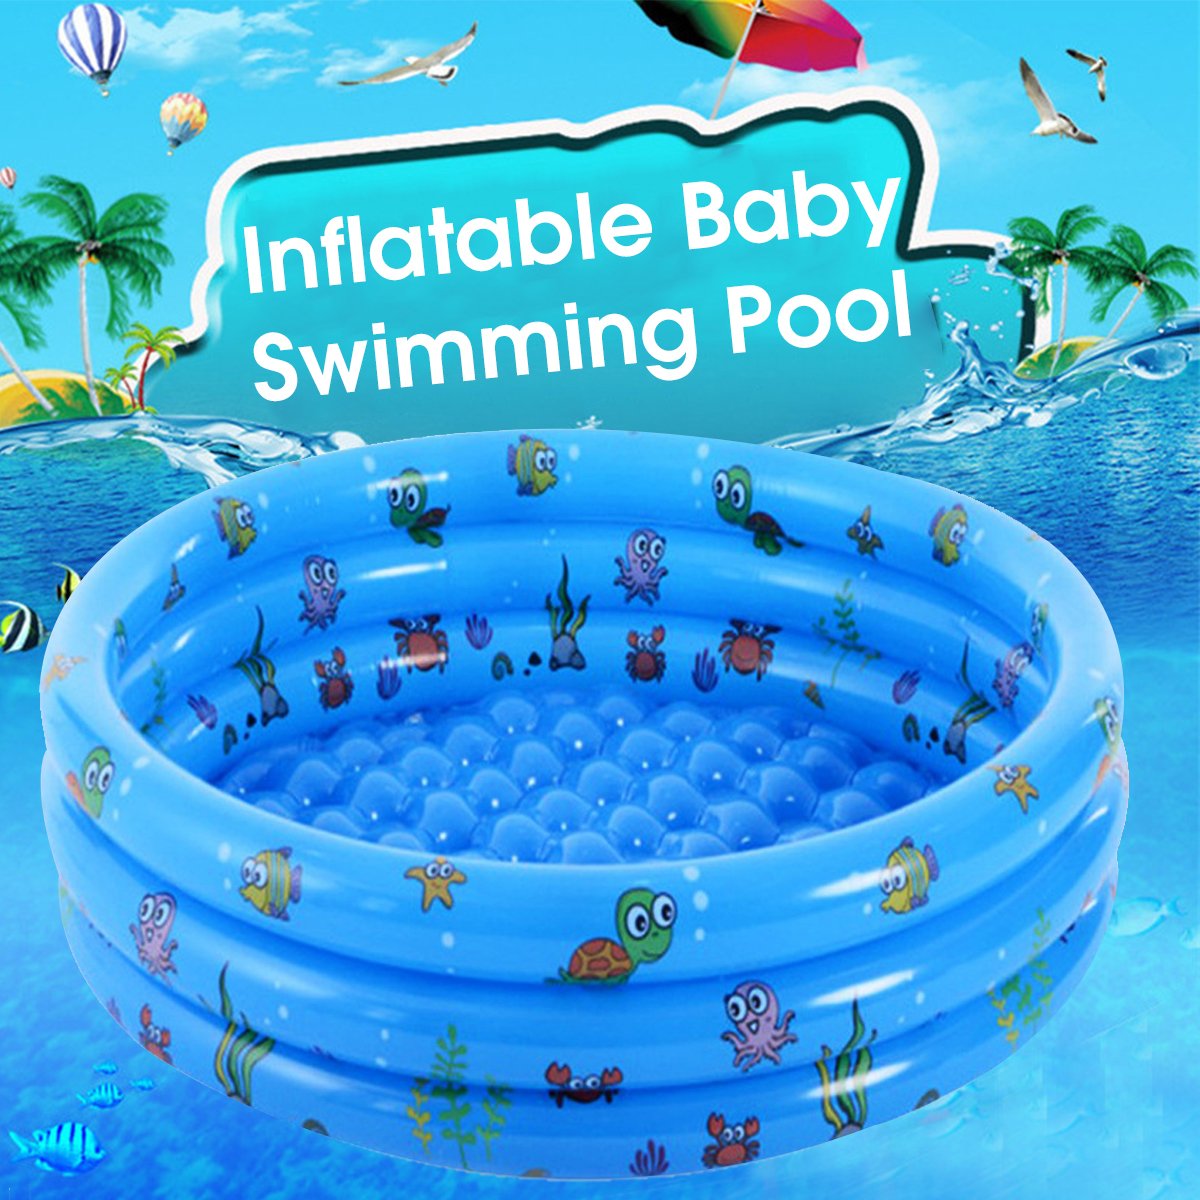 130150CM-Swimming-Pool-Childrens-Baby-Paddling-Pool-Round-Bubble-Bottom-Inflatable-Pool-with-Air-Pum-1815393-2